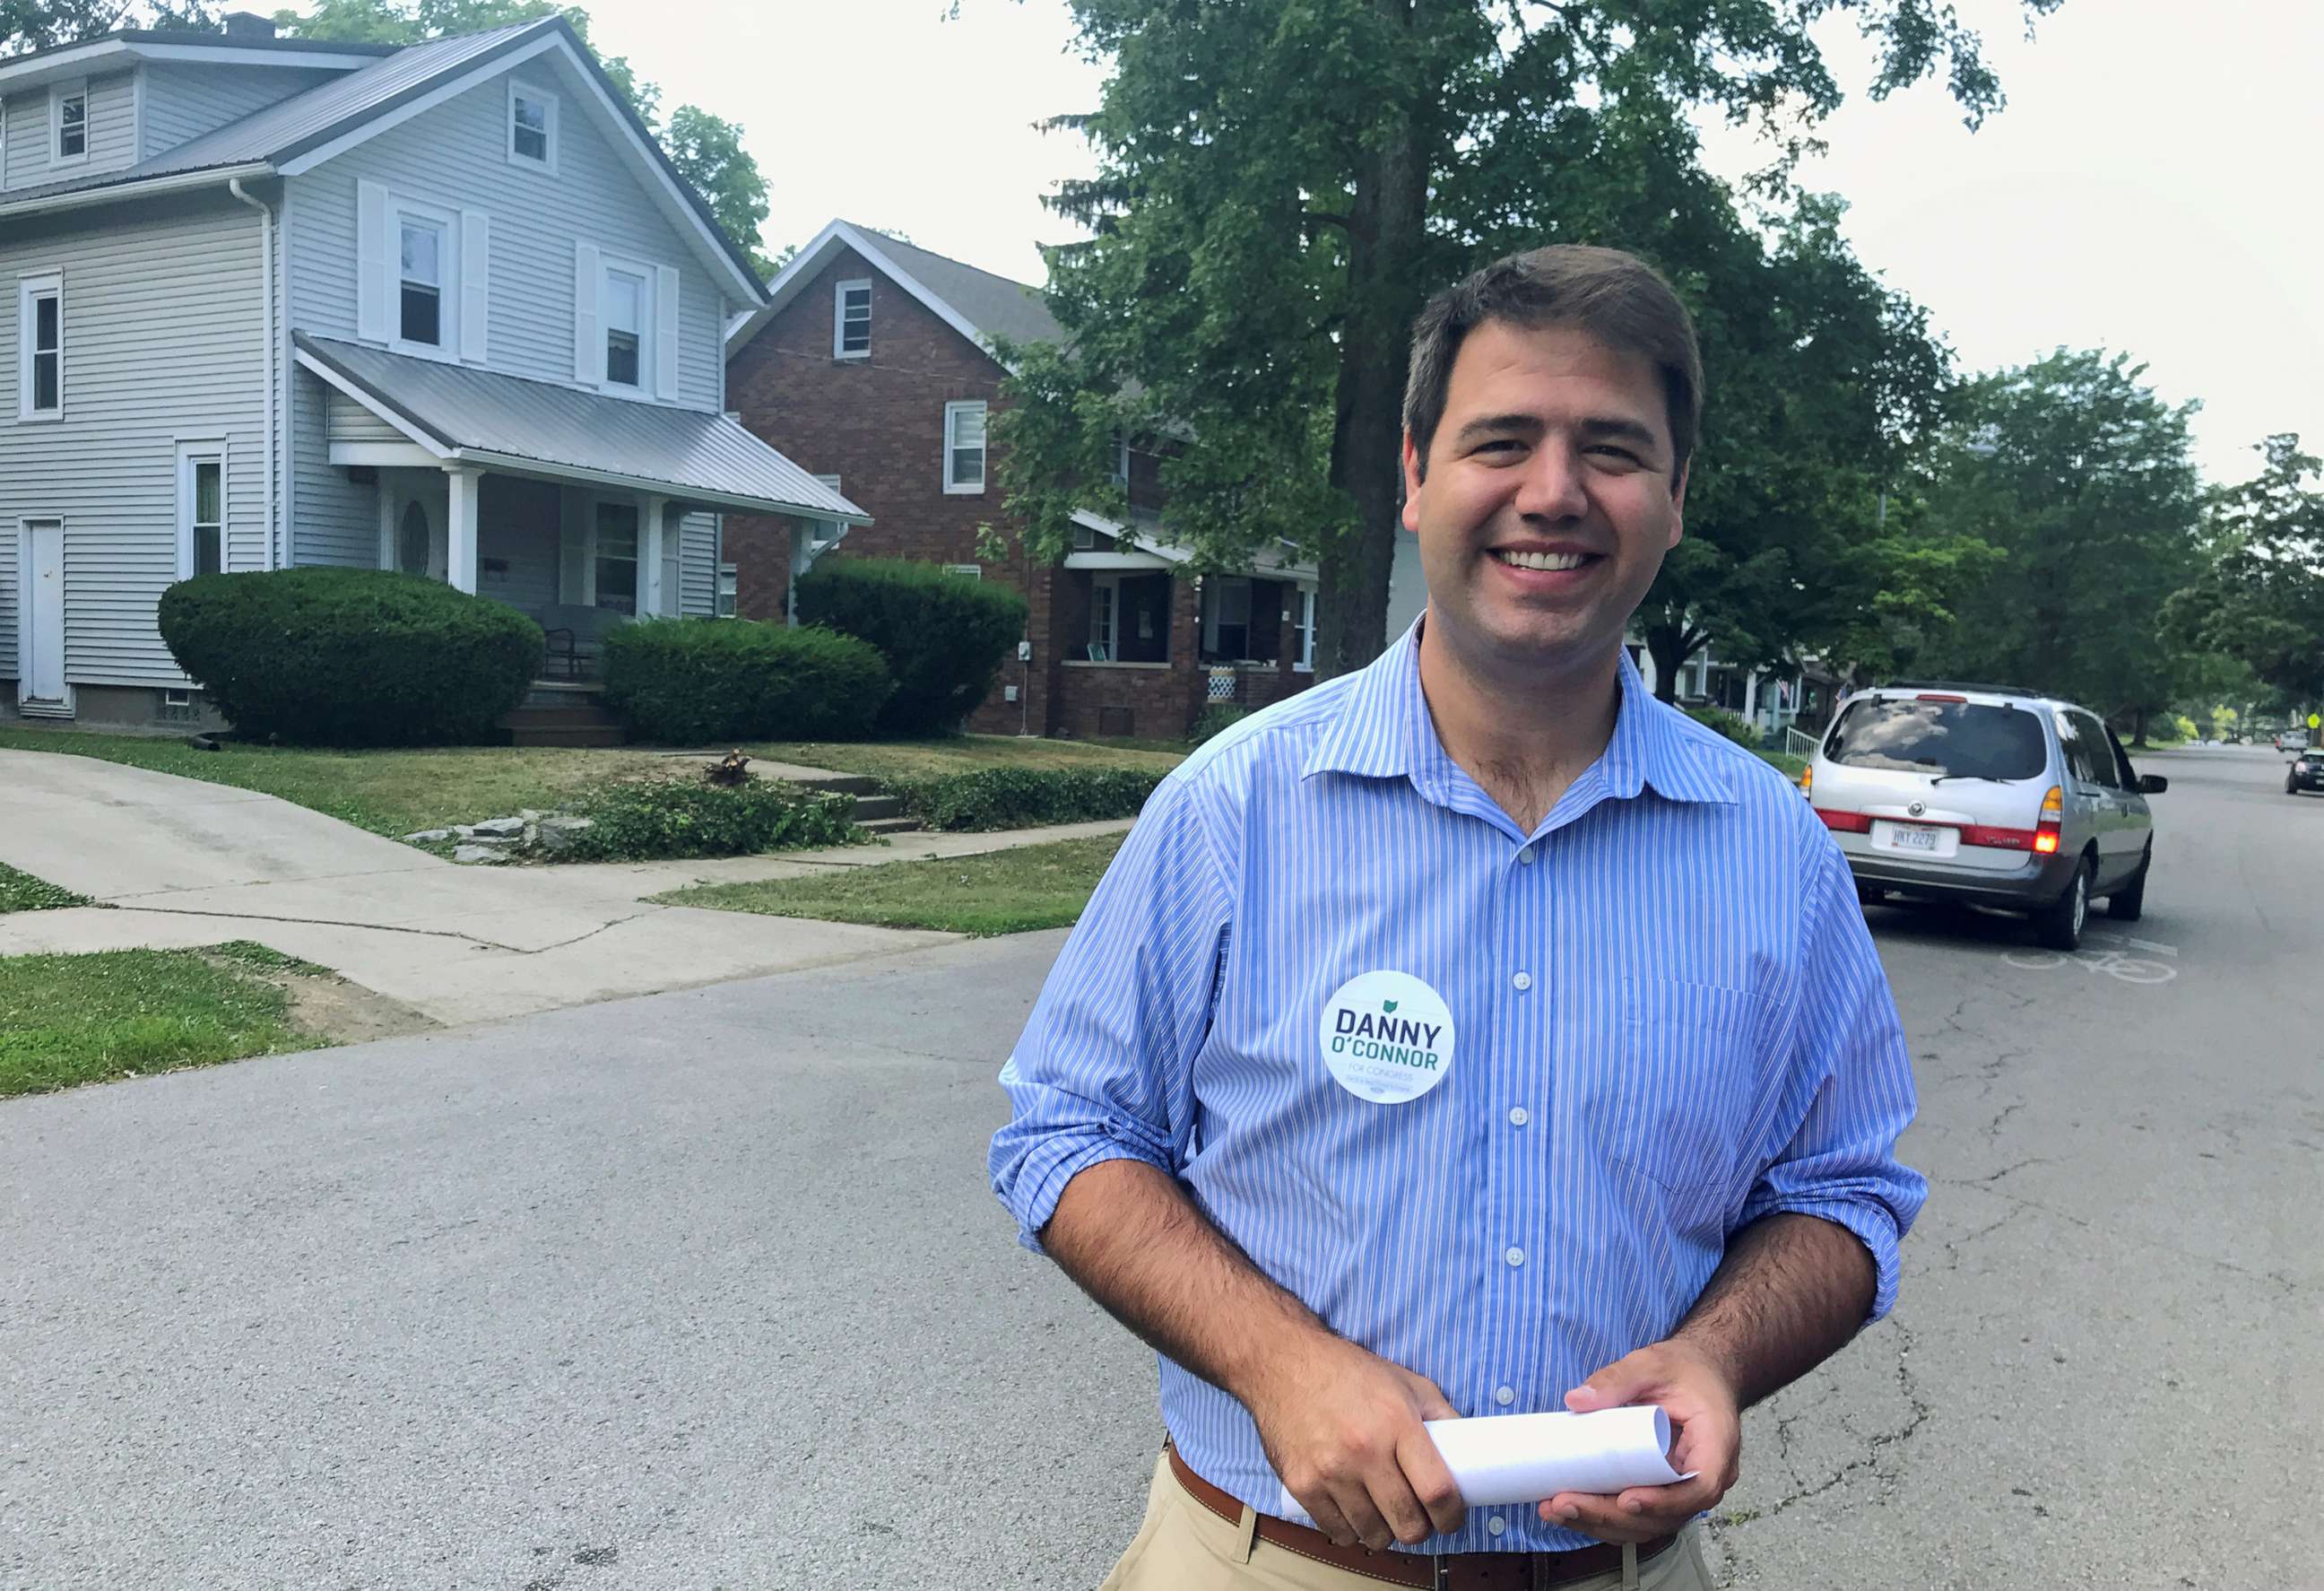 PHOTO: Democratic candidate Danny O'Connor canvasses voters, in Ohio's 12th congressional district, ahead of a special election in Mansfield, Ohio, July 15, 2018. Picture taken July 15, 2018.